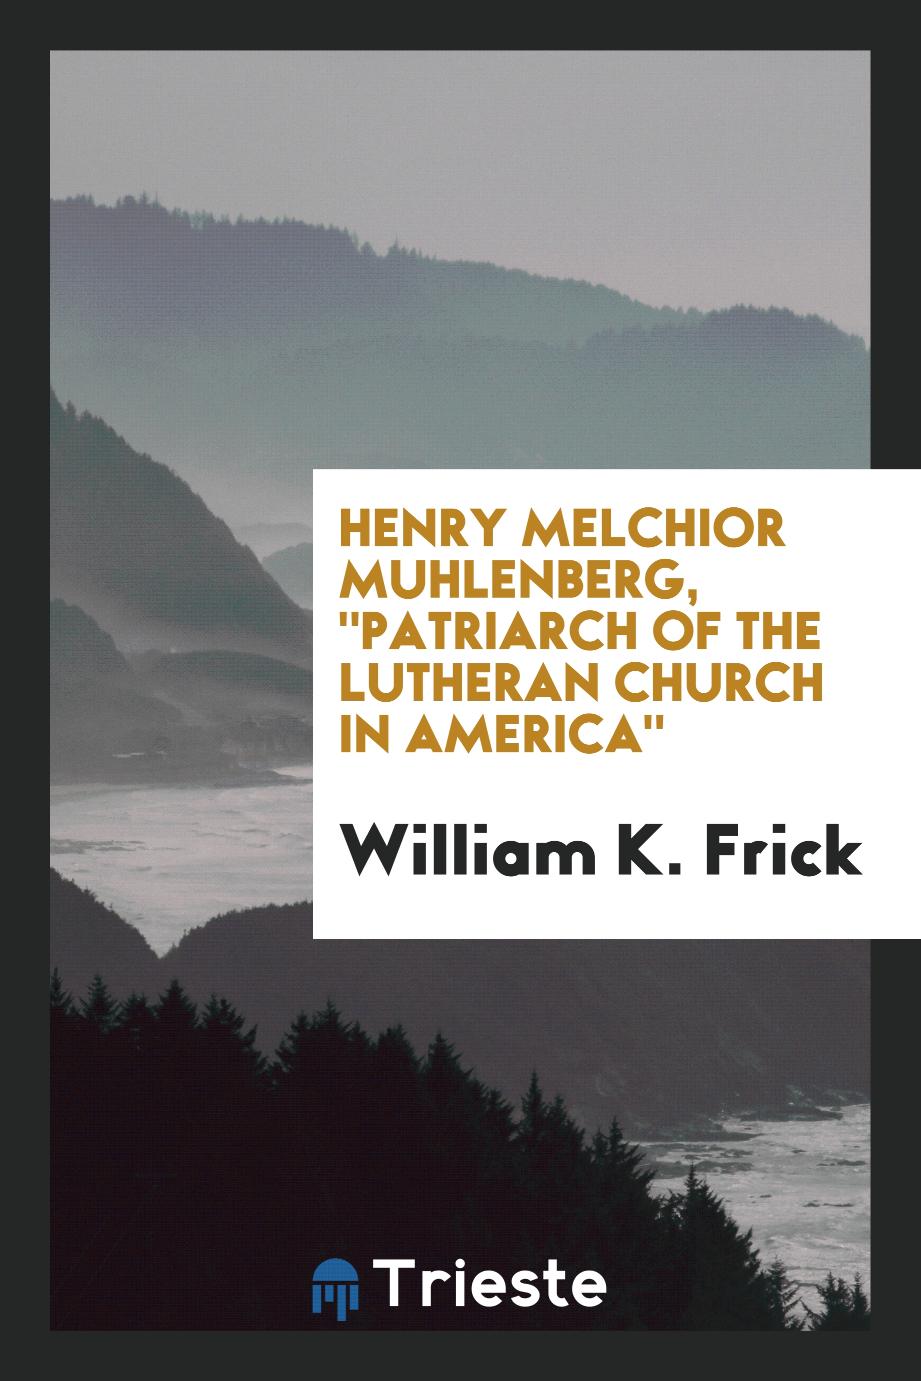 Henry Melchior Muhlenberg, "Patriarch of the Lutheran Church in America"